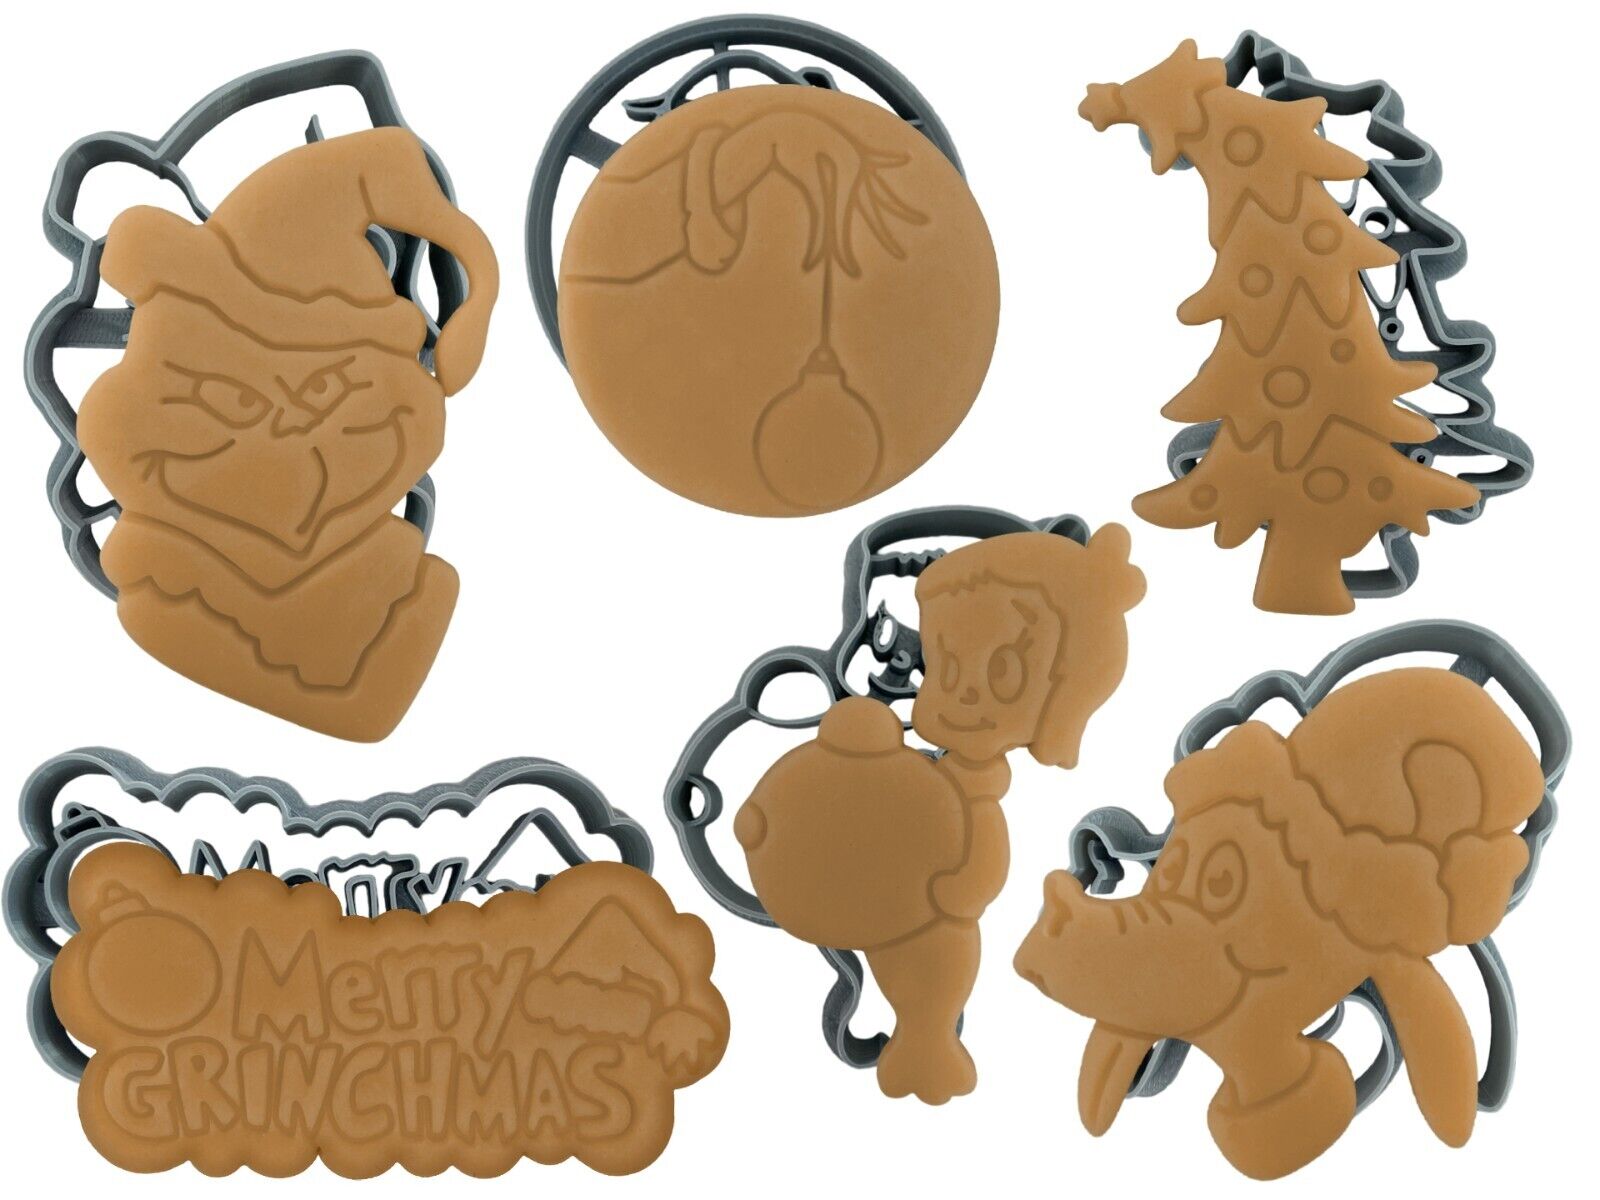 Grinch Christmas Set of 6 Cookie Cutters | Grinch | Grinch Hand | Dr Seuss